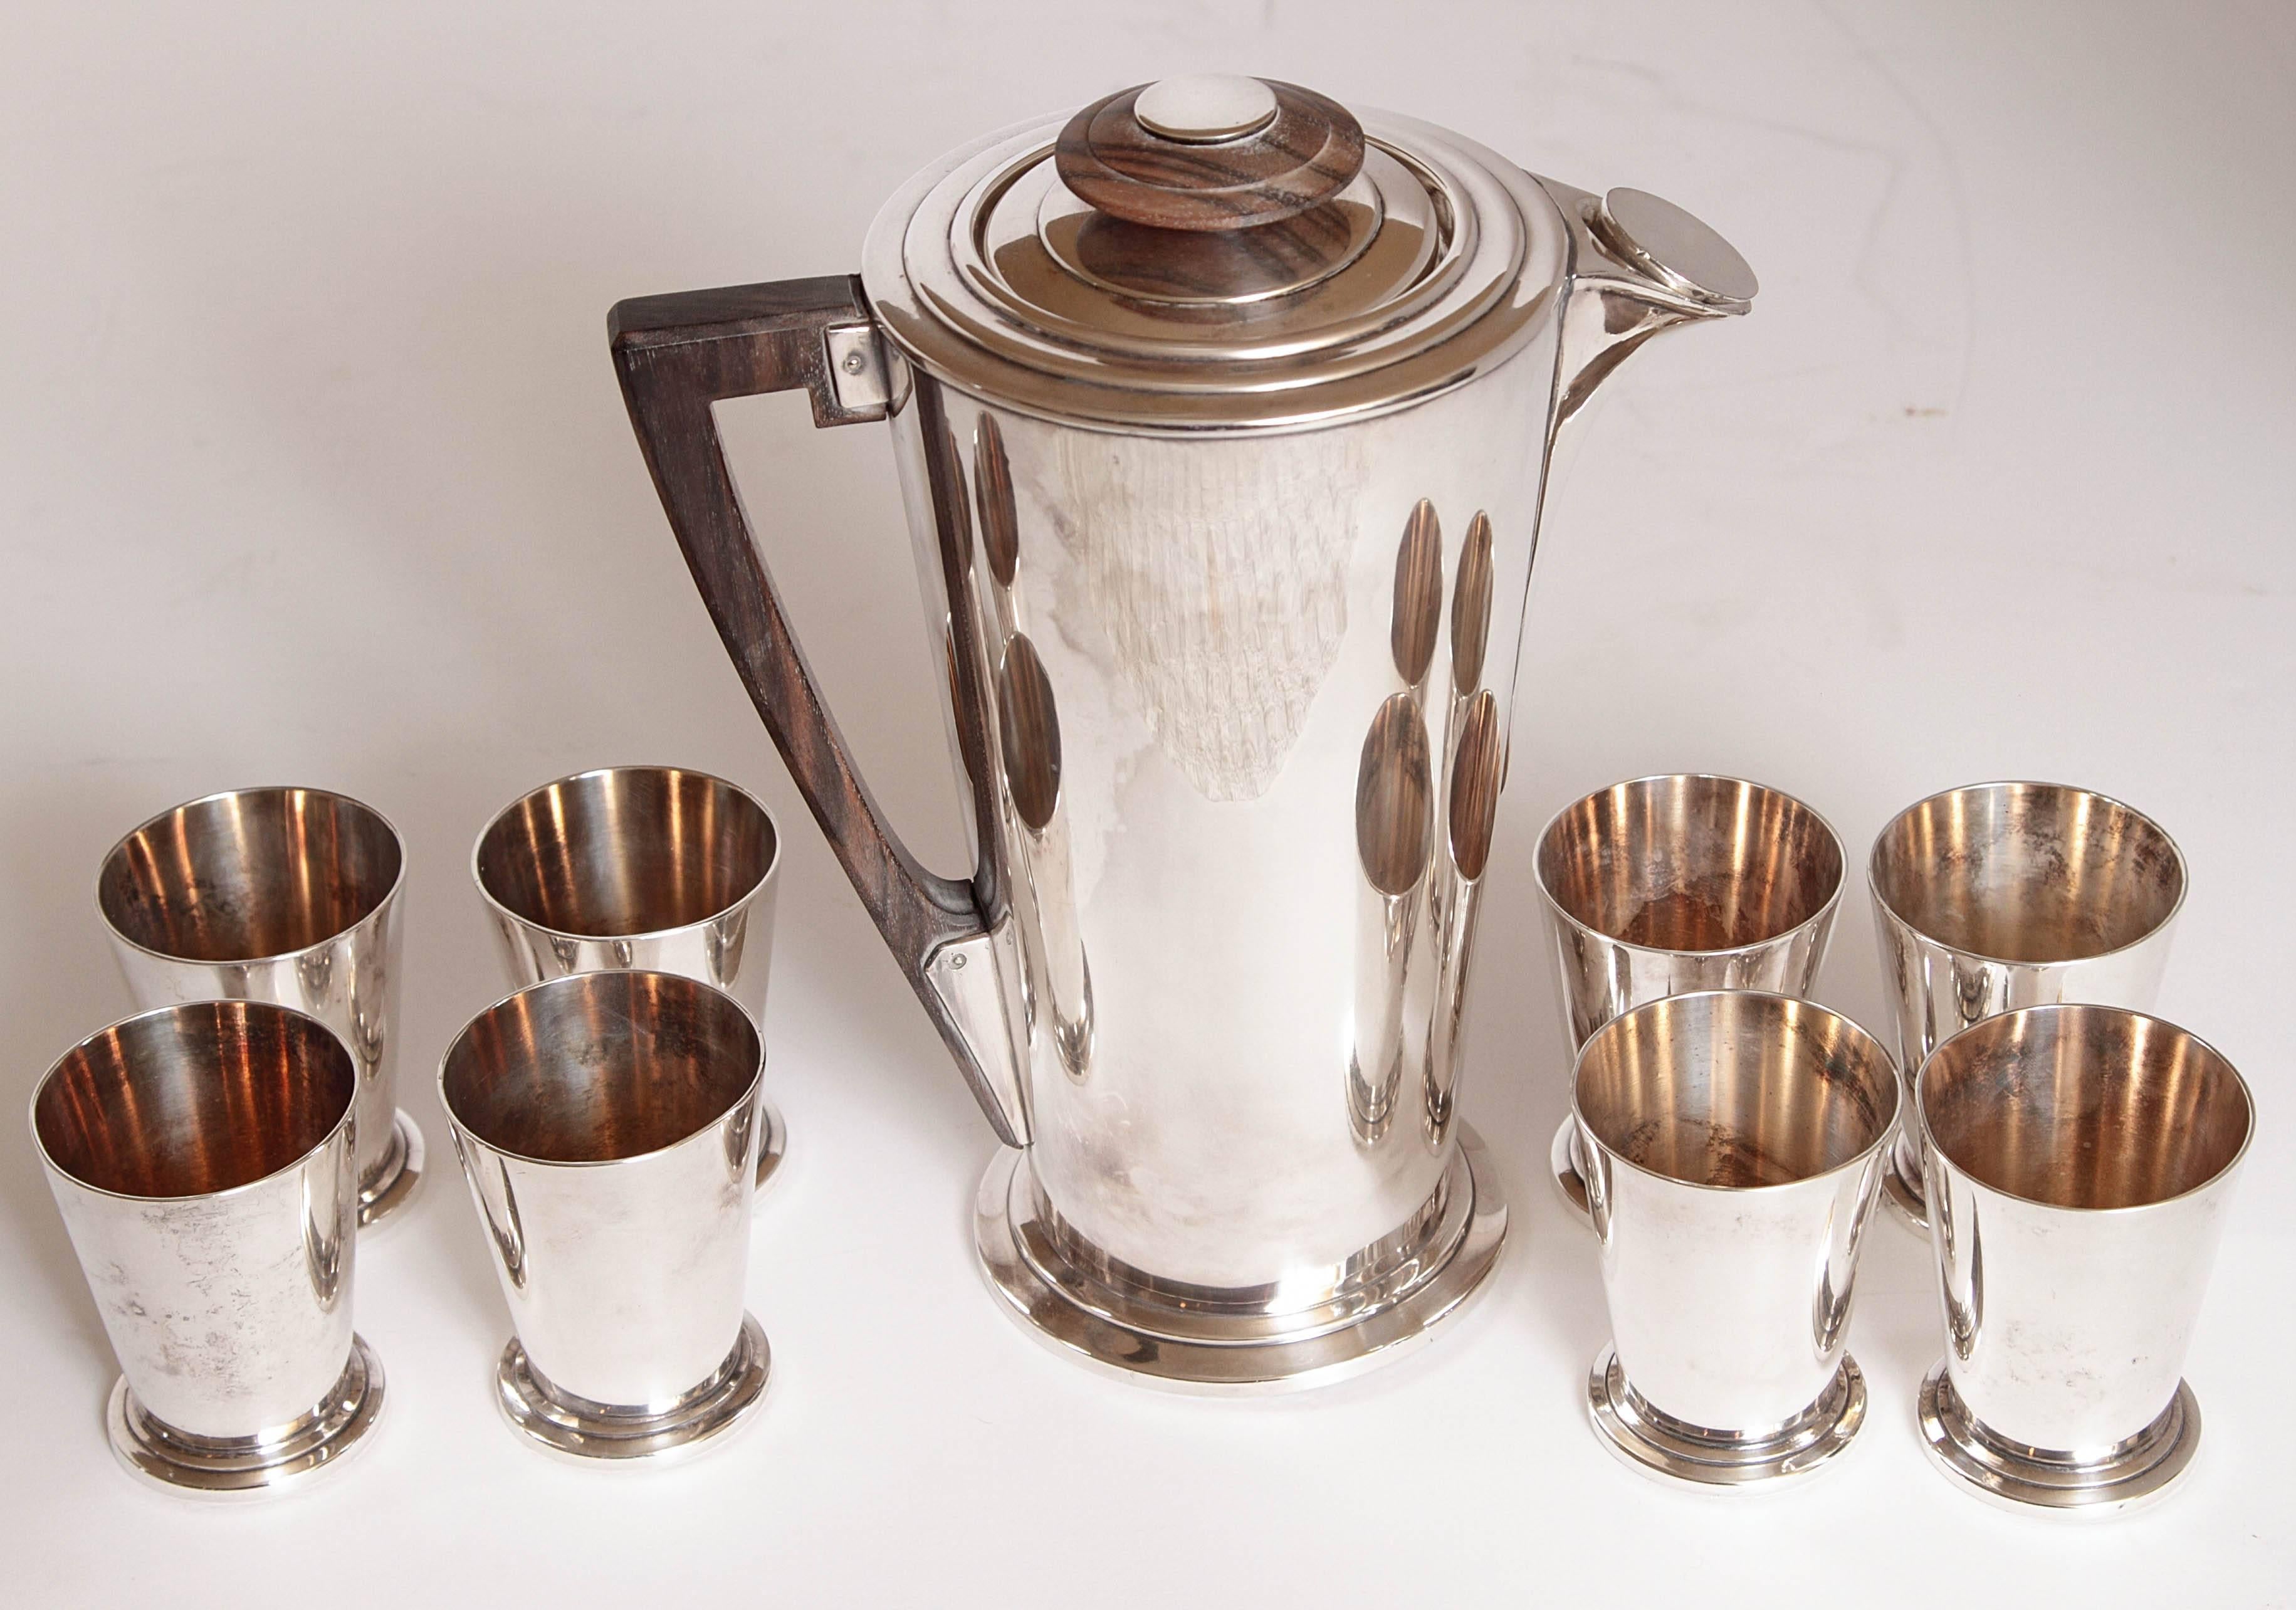 Primo quality thick silver plate and amboyna / Macassar wood beverage set.
circa 1927 patented design, originally for the Cruise Ship, set #360.
These examples are not marked with the patent date.
Shaker or pitcher with original removable cap,